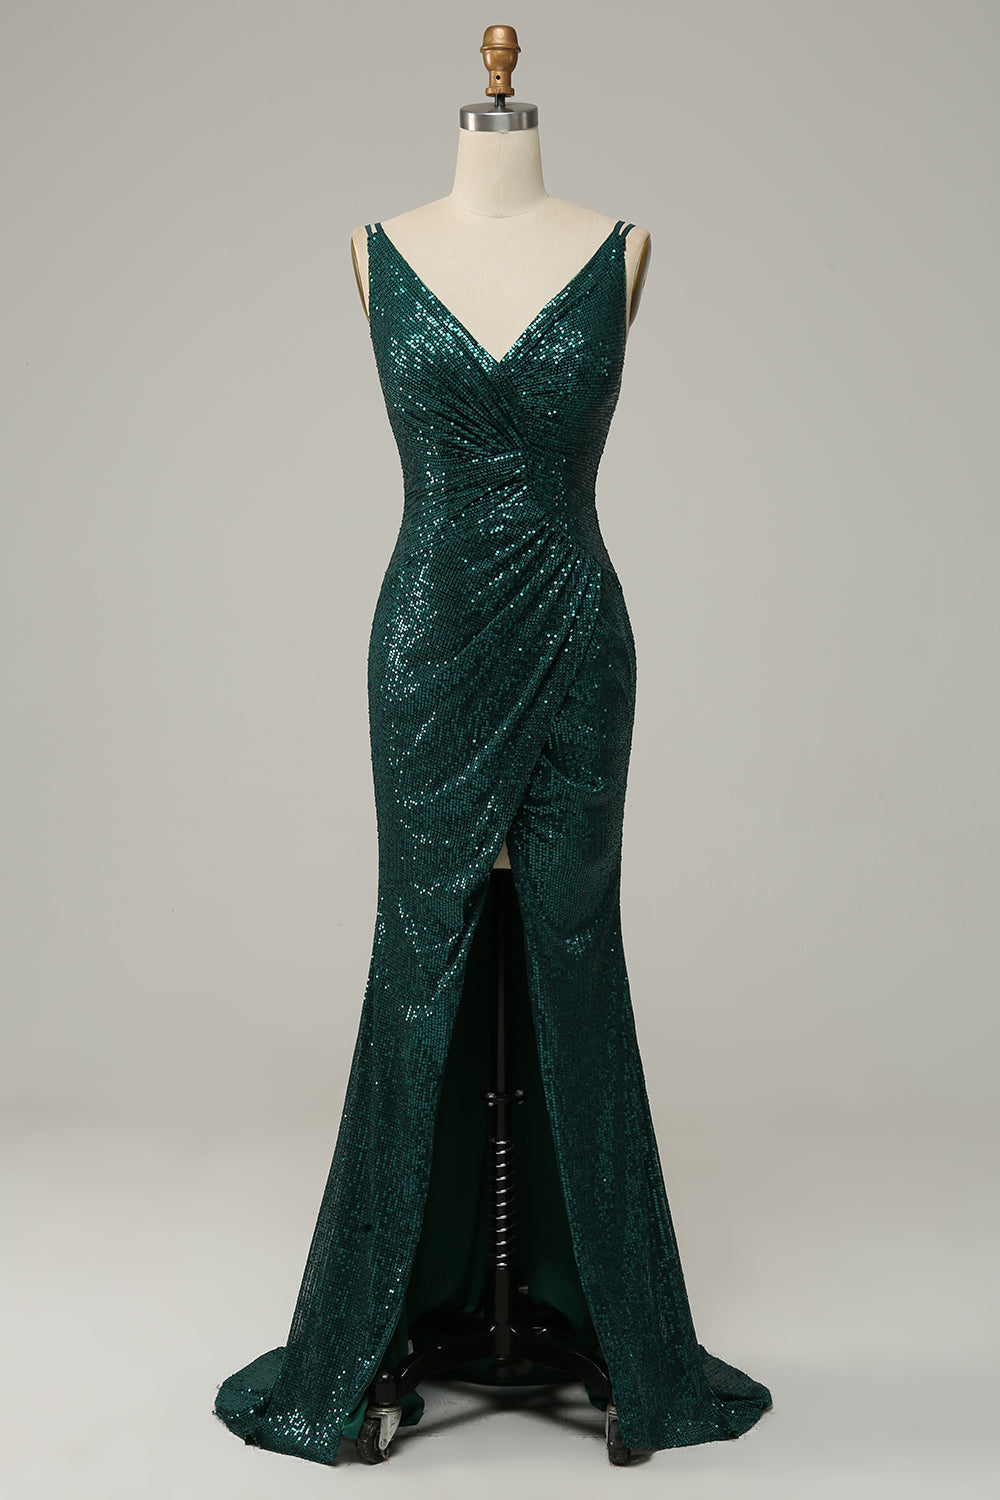 Dark Green Sequined Spaghetti Straps Corset Prom Dress With Slit Gowns, Bridesmaid Dress Wedding